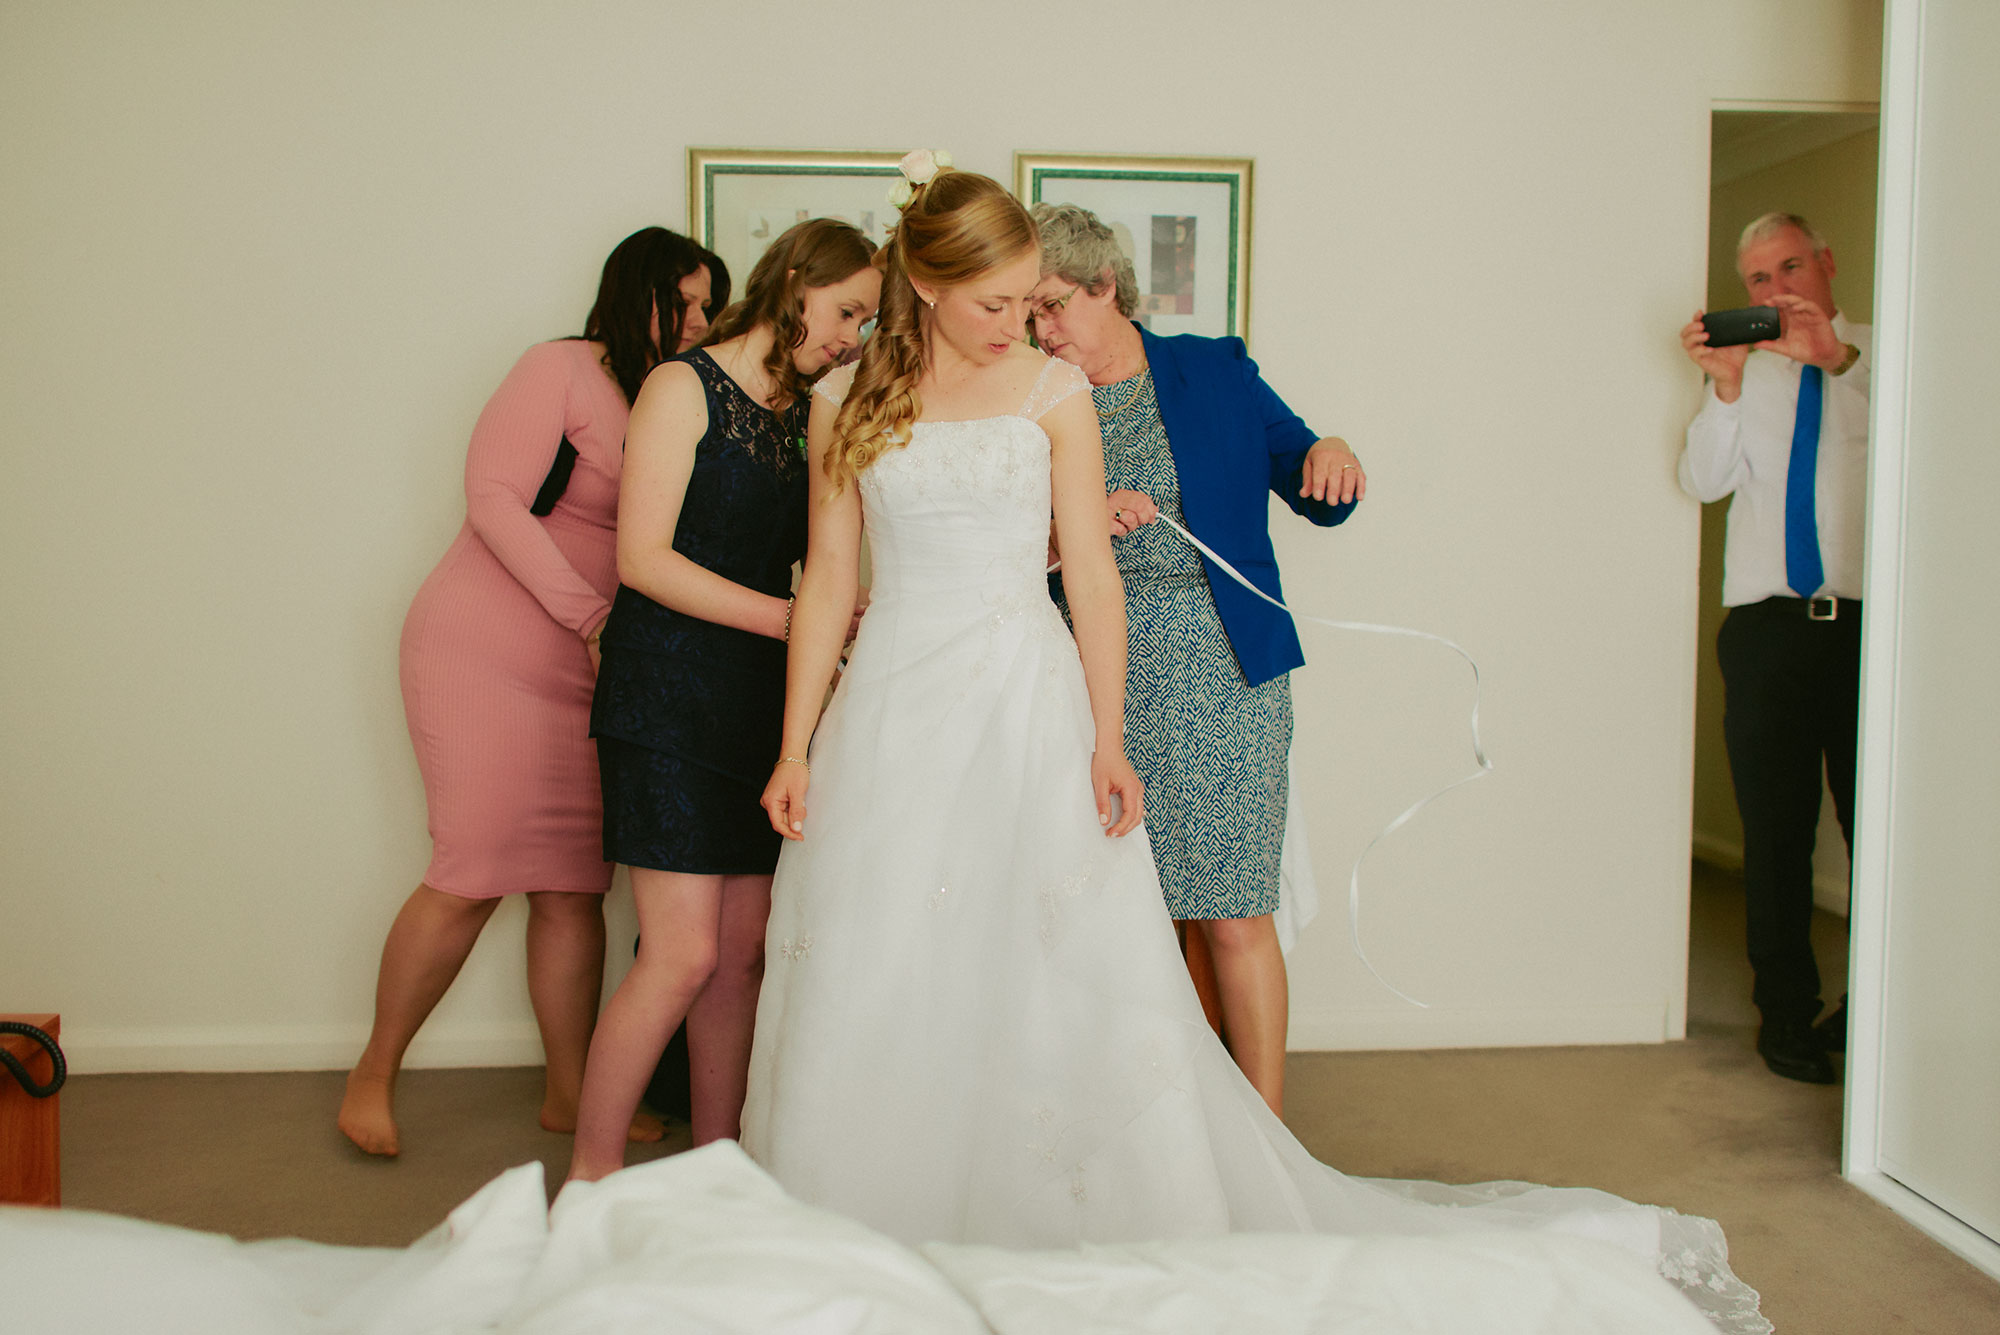 Helping the bride into her wedding dress